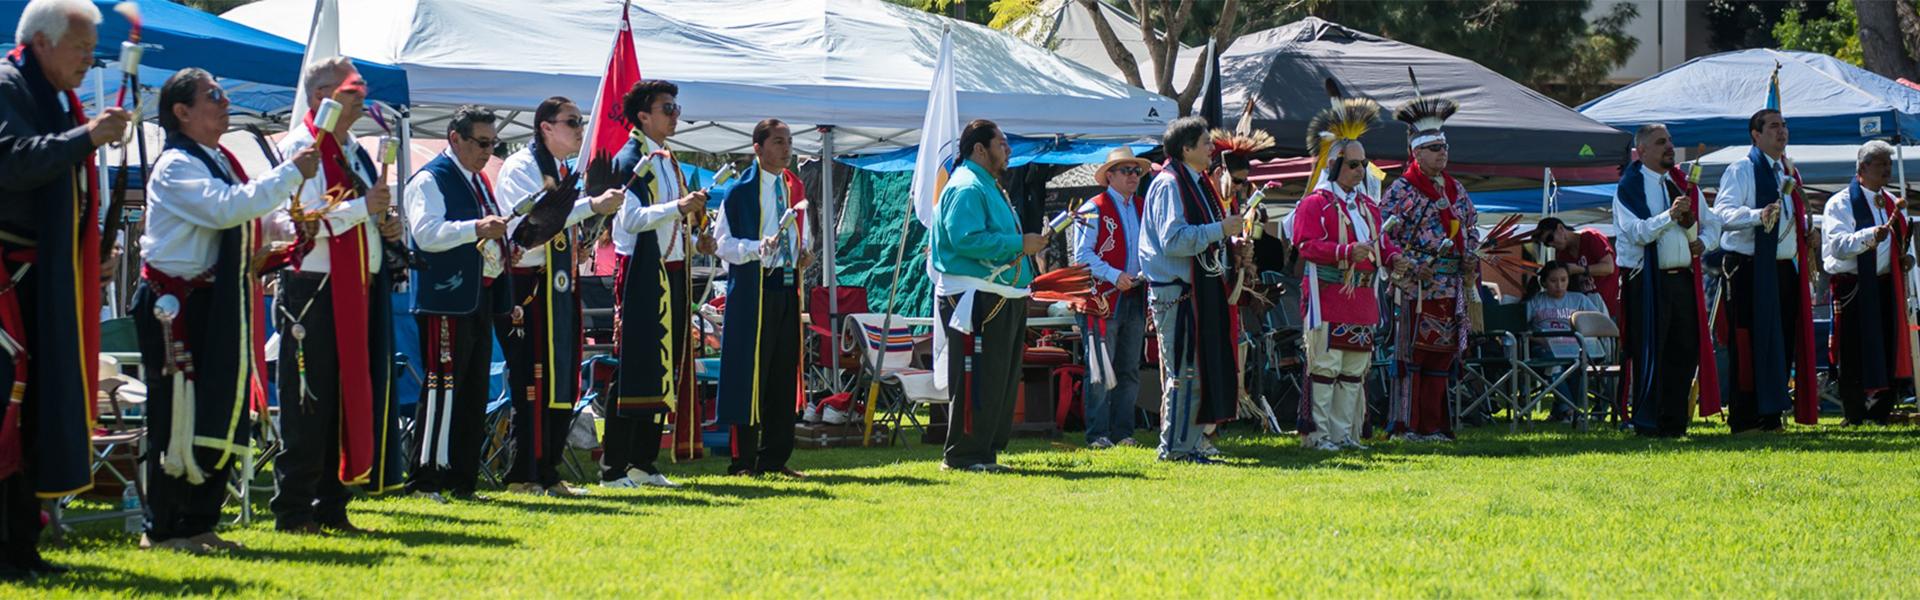 CSULB Pow Wow 2018 Photo credit: https://www.csulb.edu/discover/article/time-honored-traditions-highlight-pow-wow 